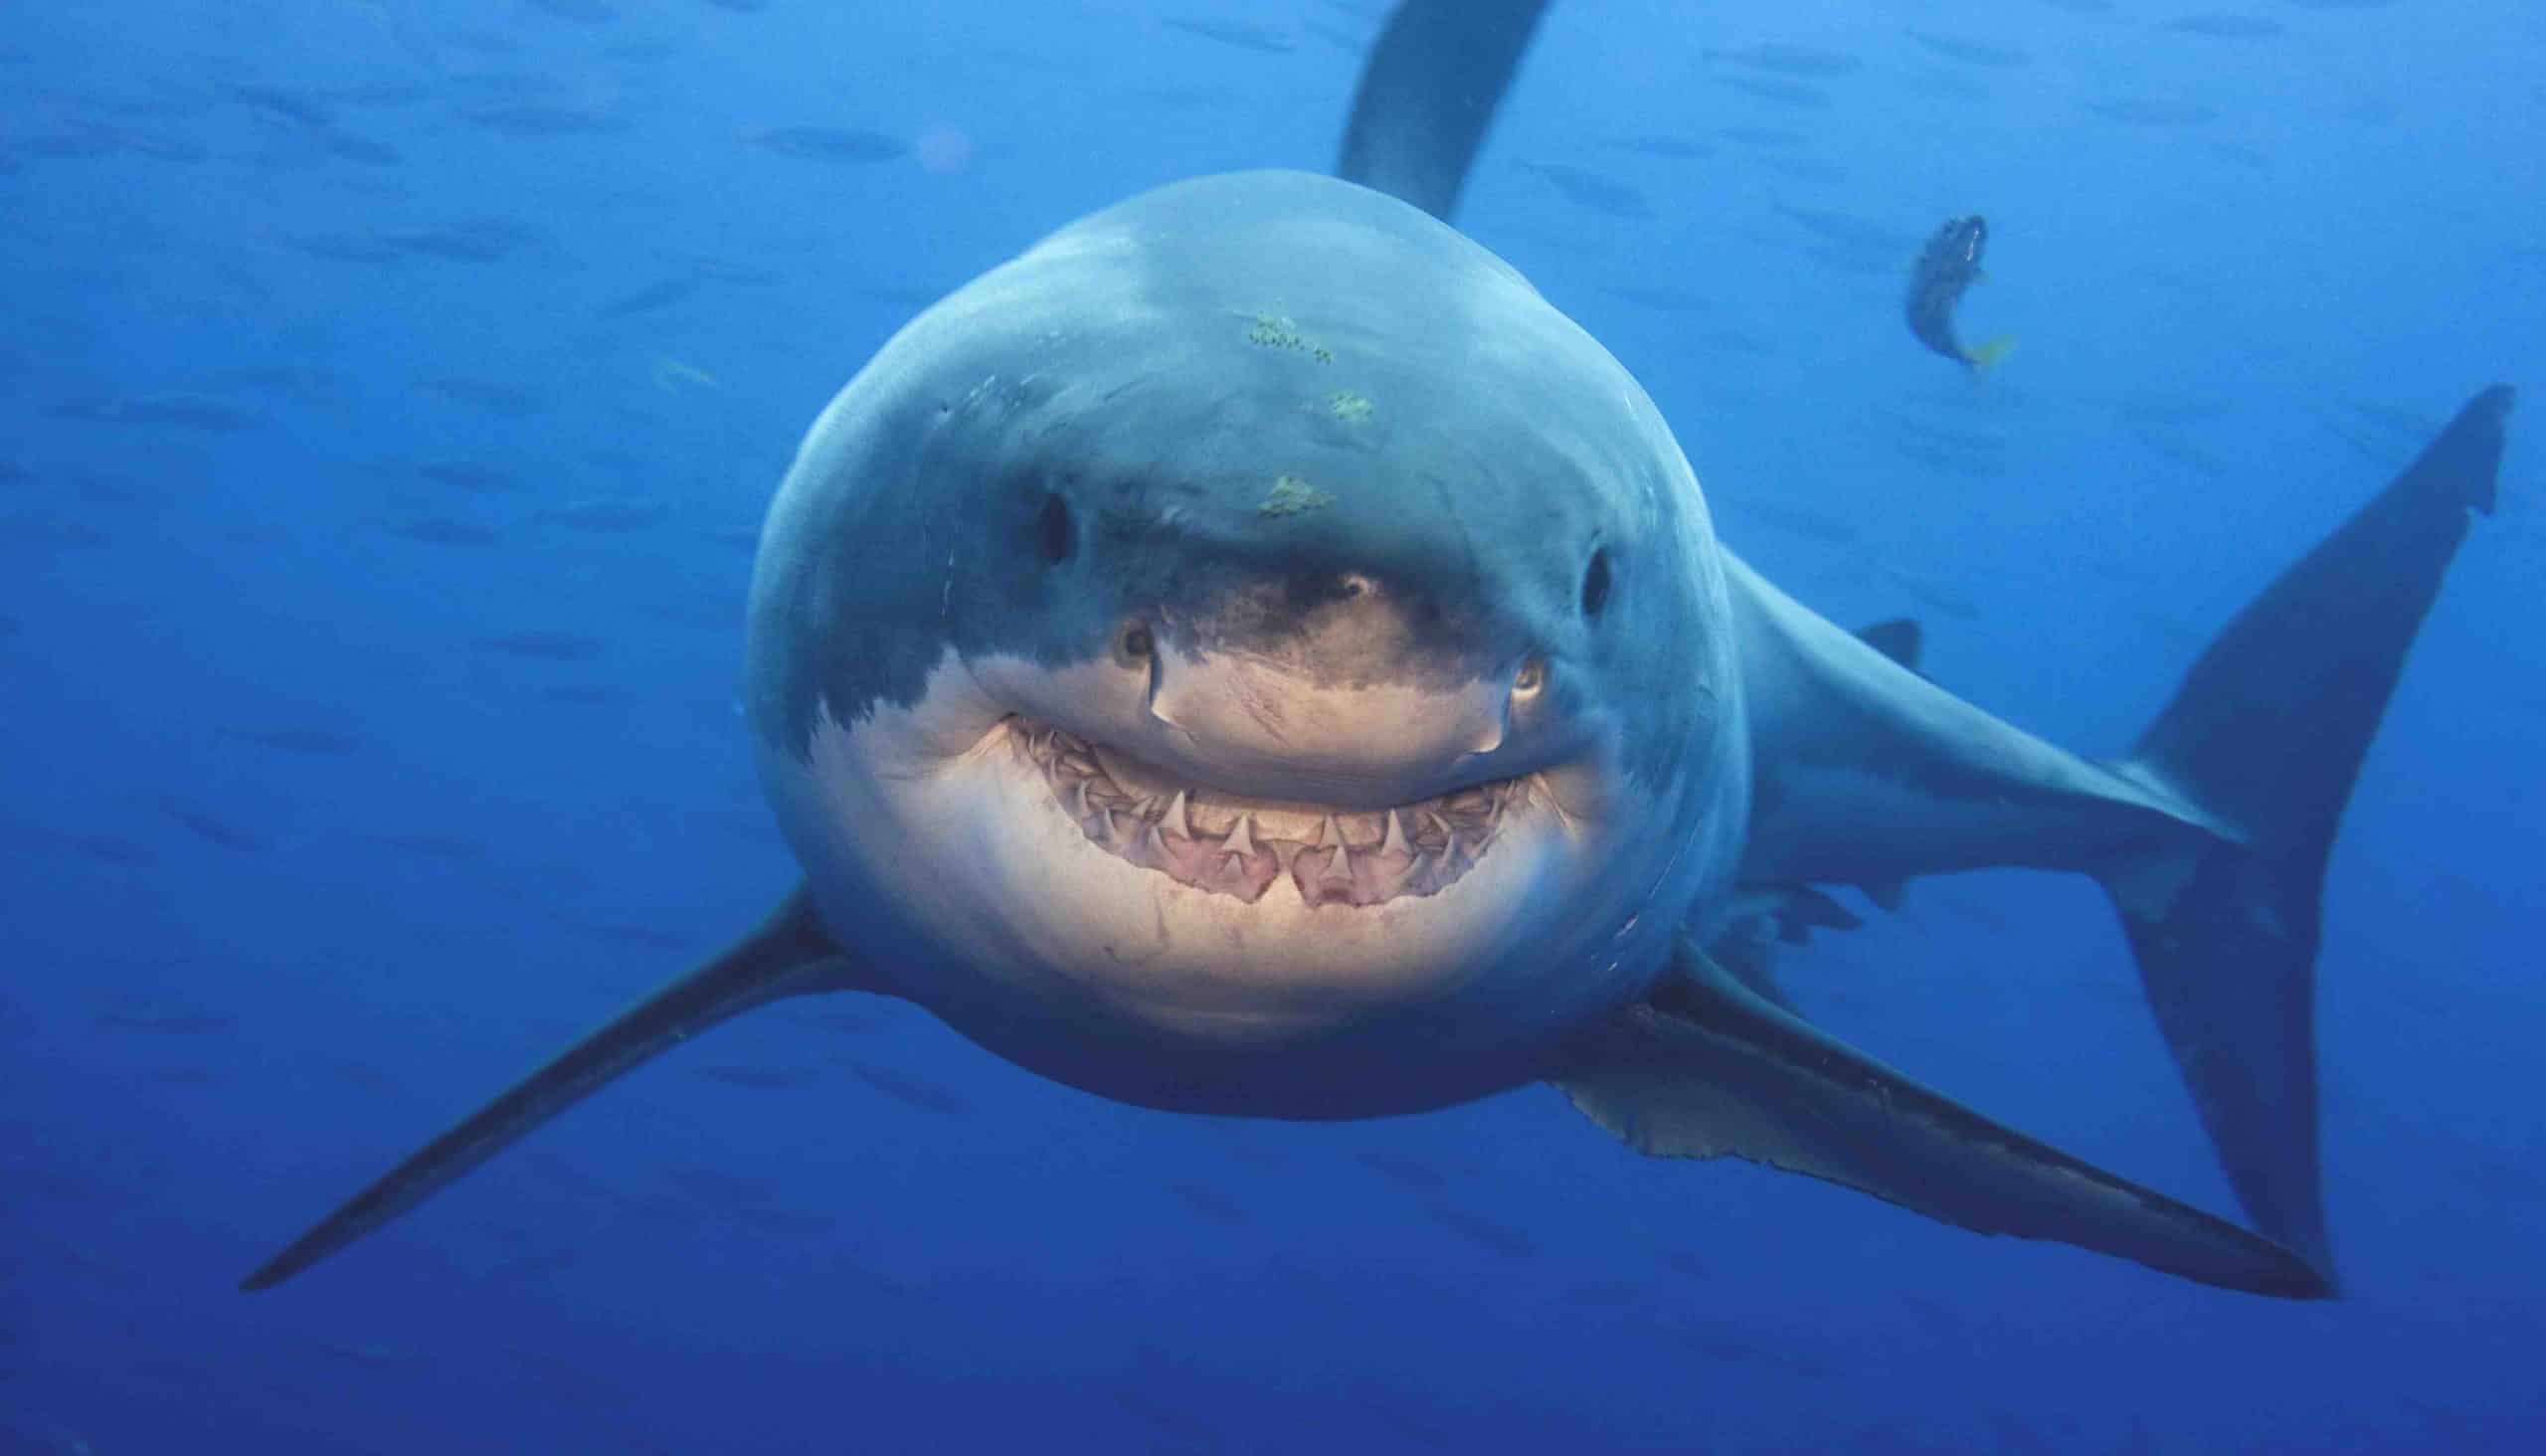 Are surfers more likely to get attacked by sharks?